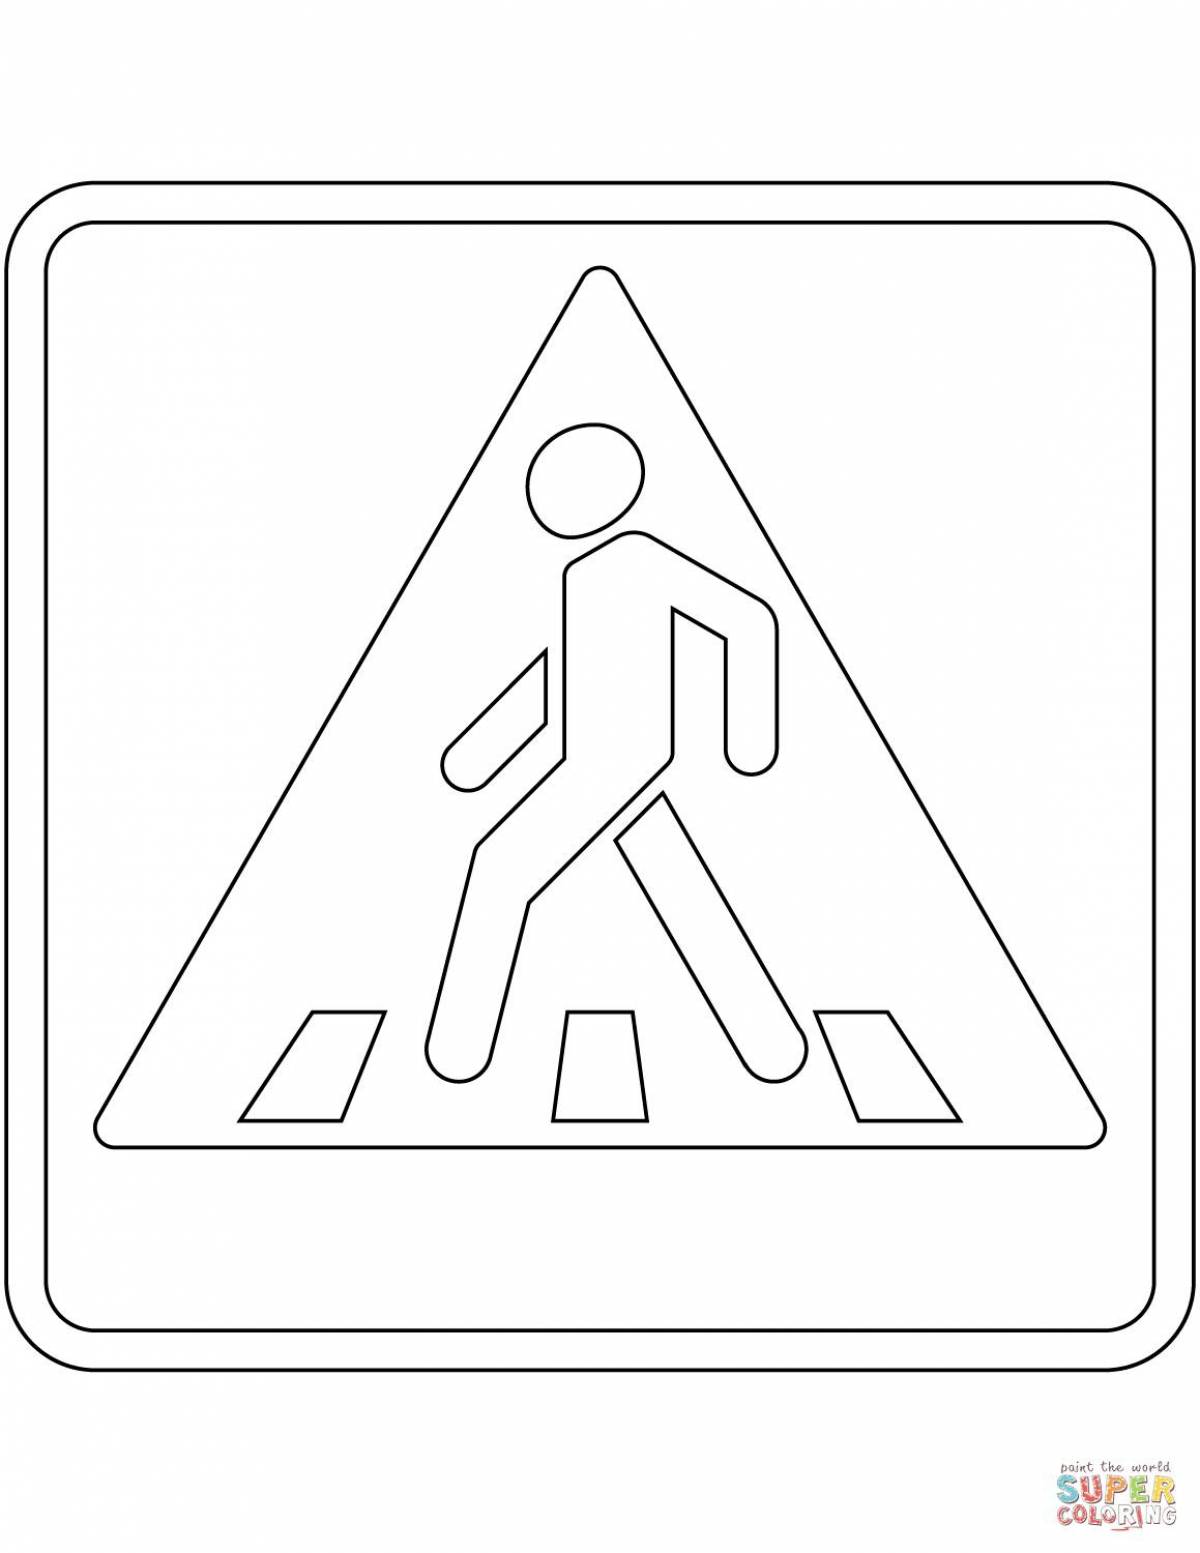 Crossing sign #11